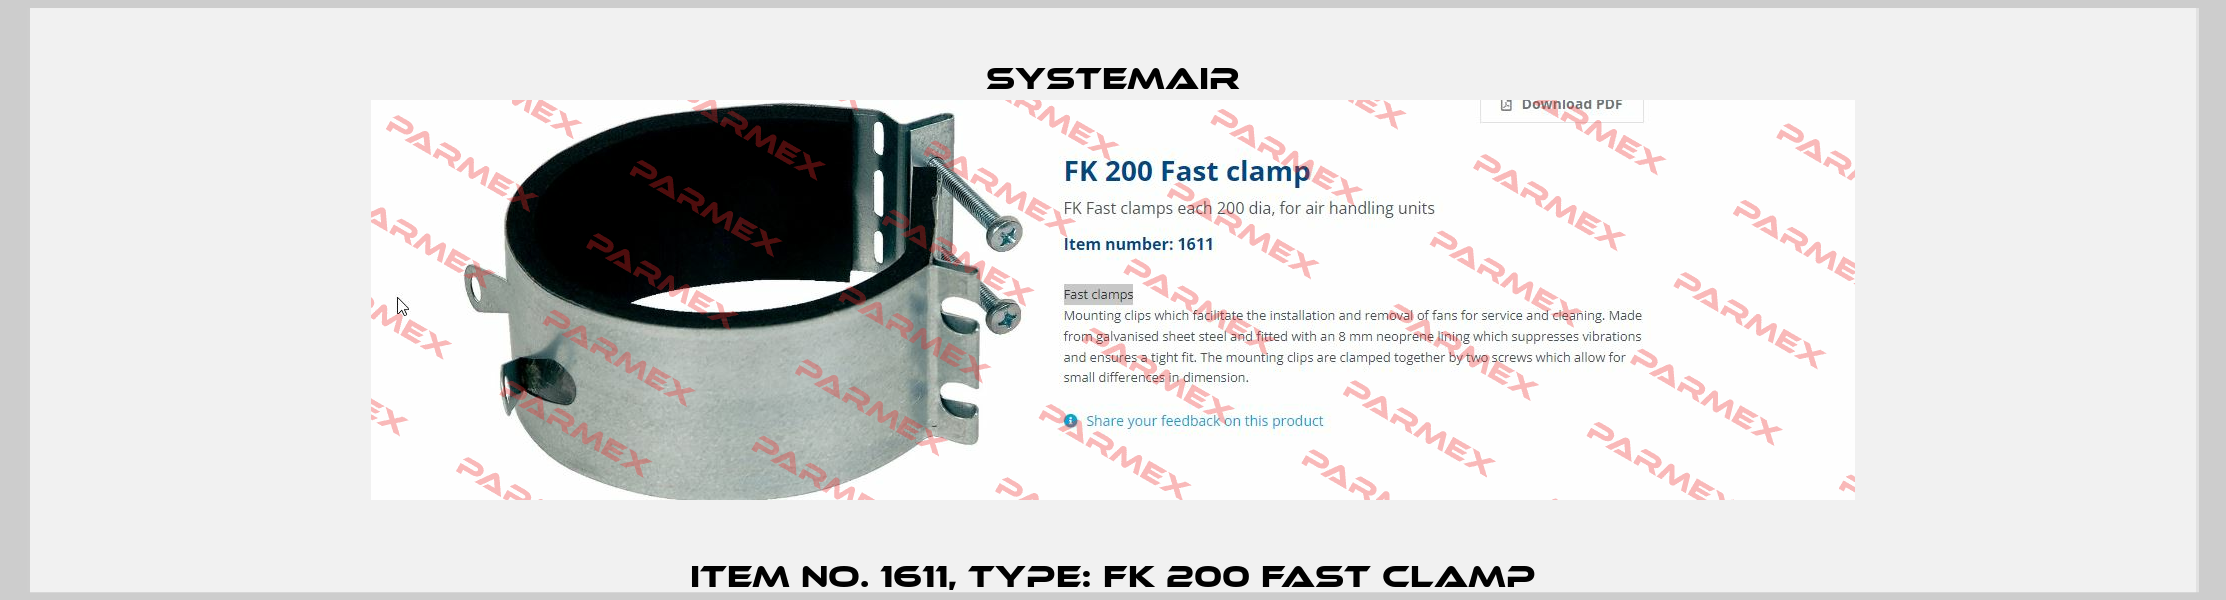 Item No. 1611, Type: FK 200 Fast clamp Systemair